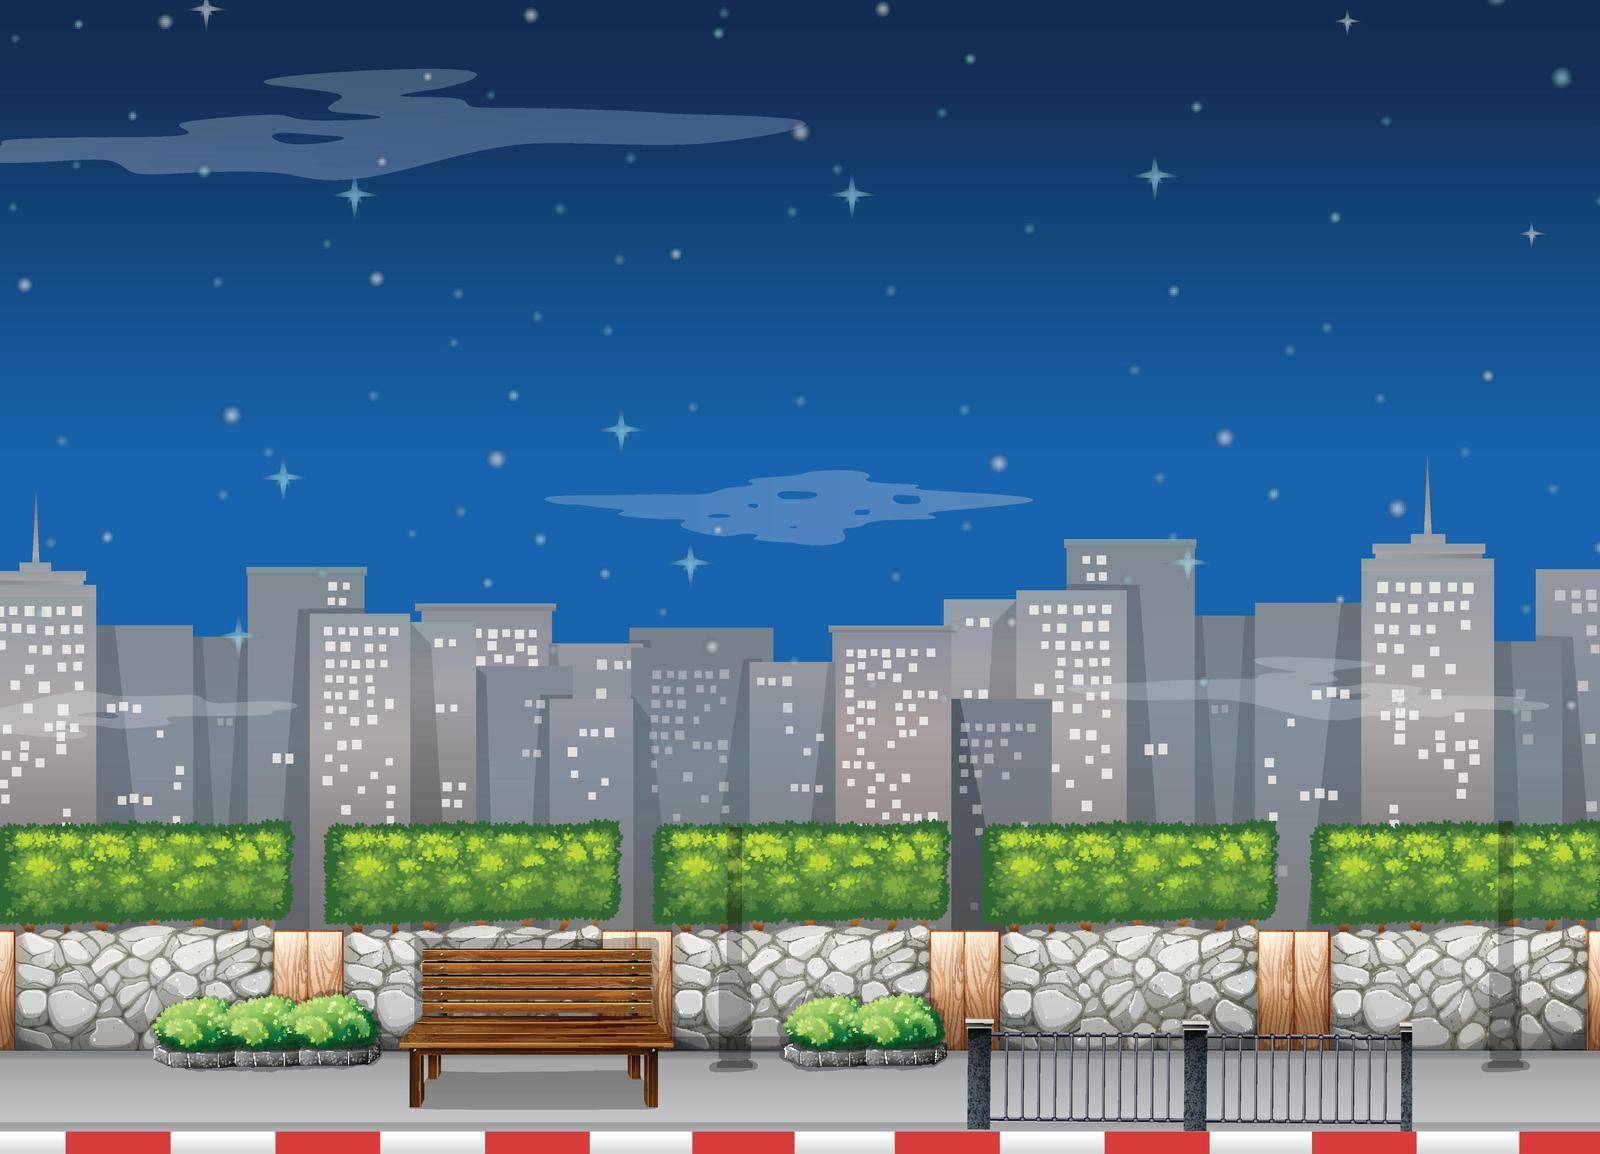 City scene with tall buildings at night illustration